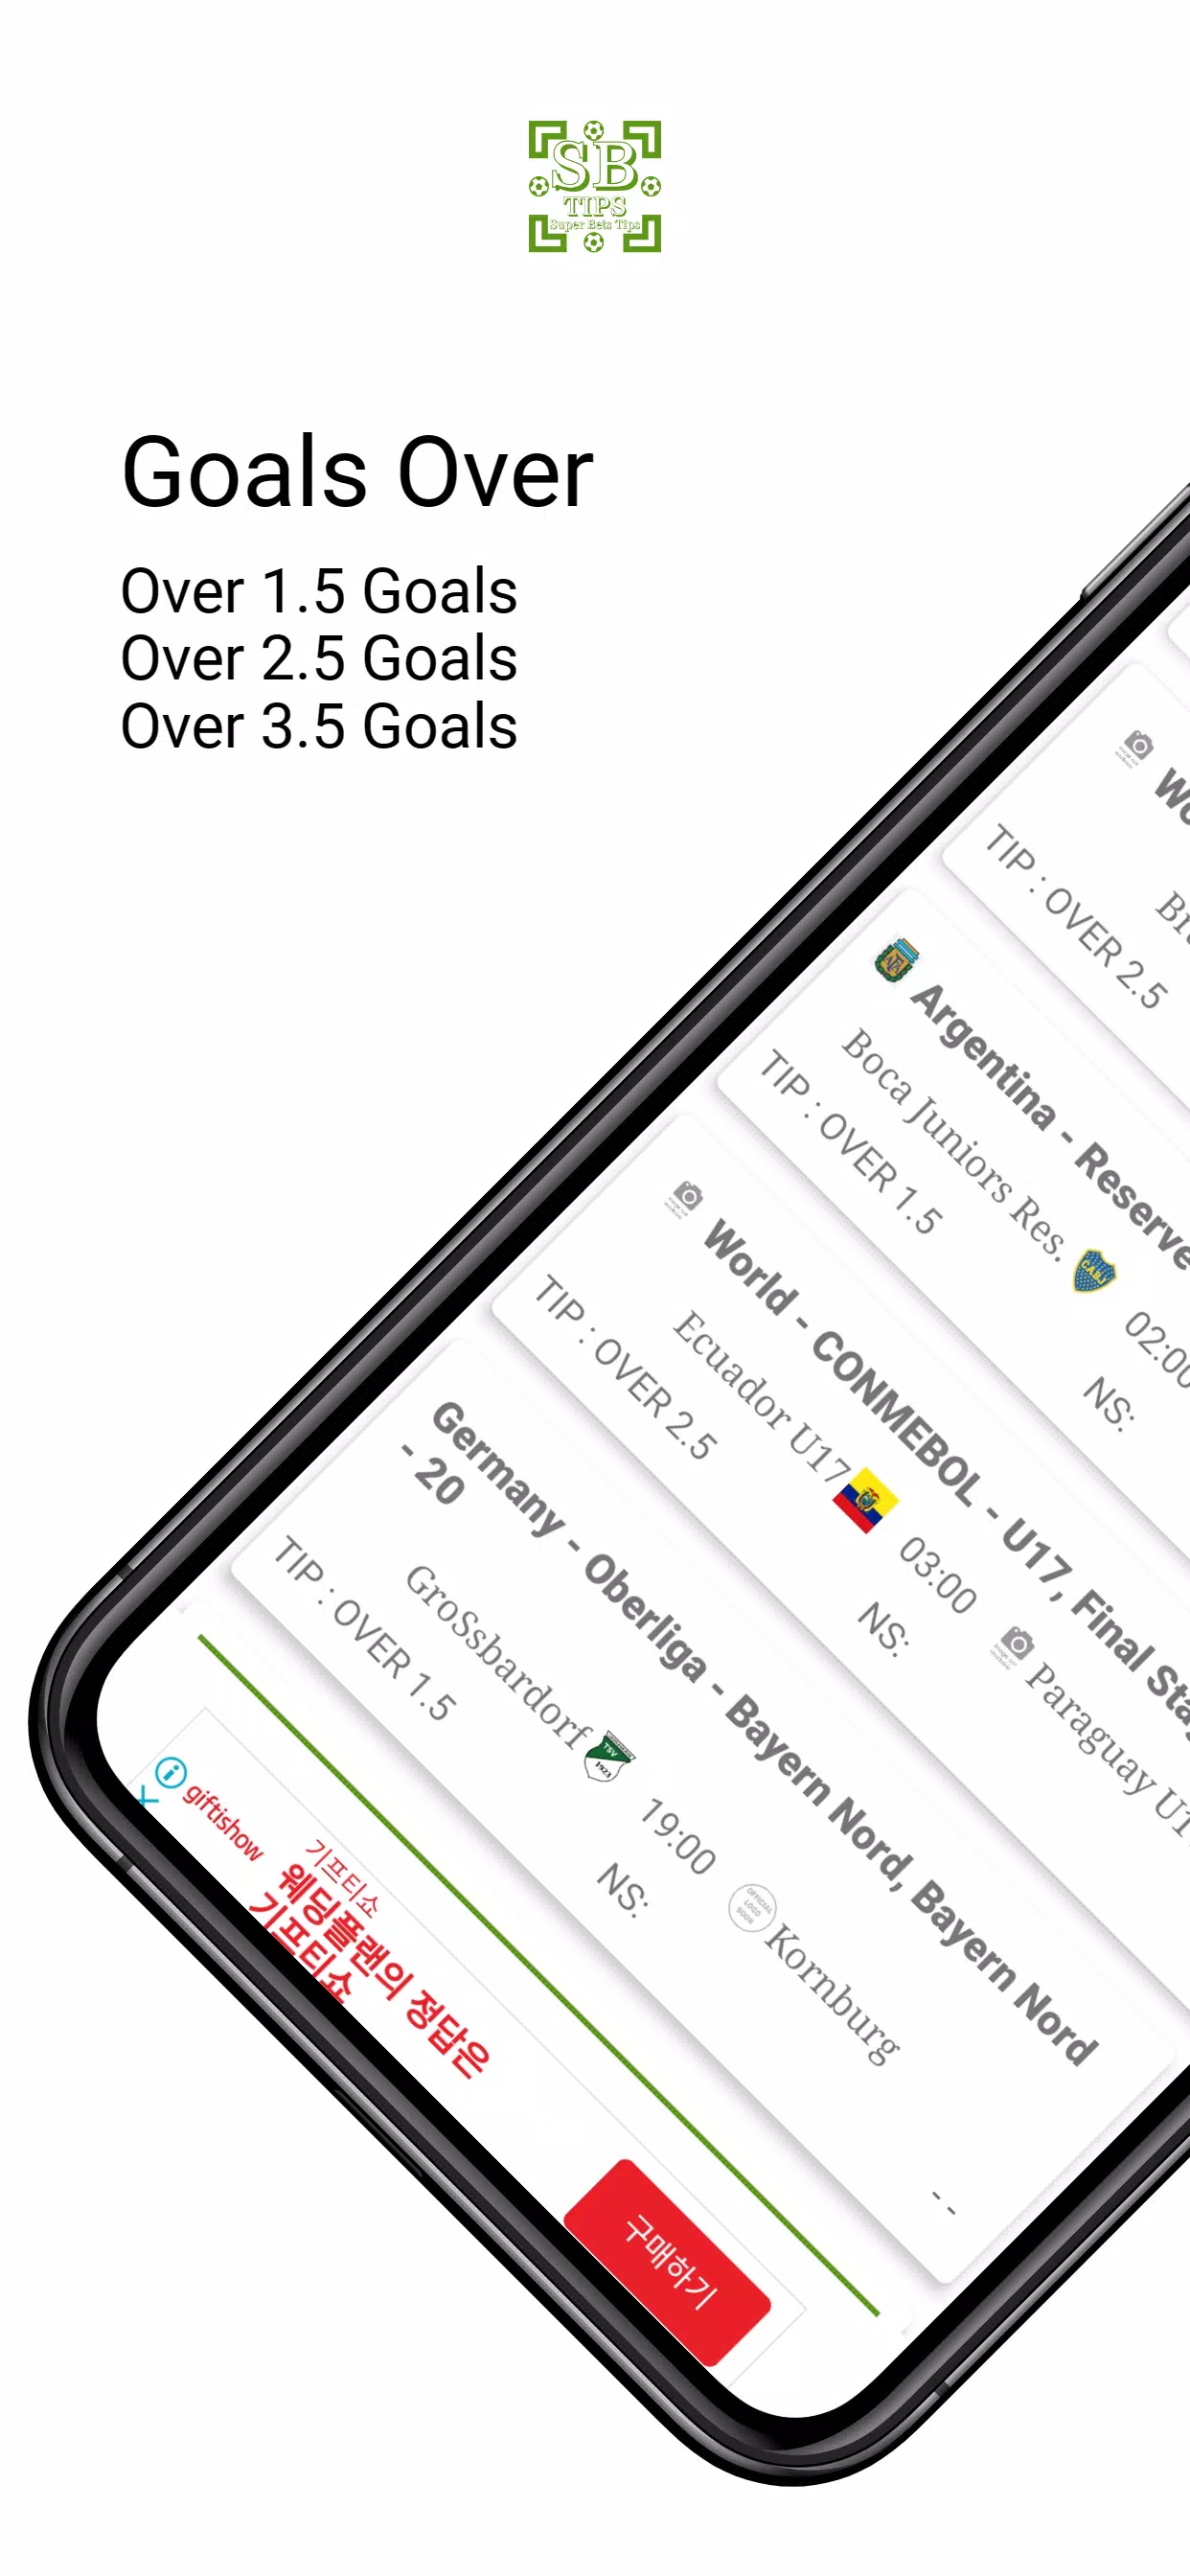 BetSuper Tips - Apps on Google Play